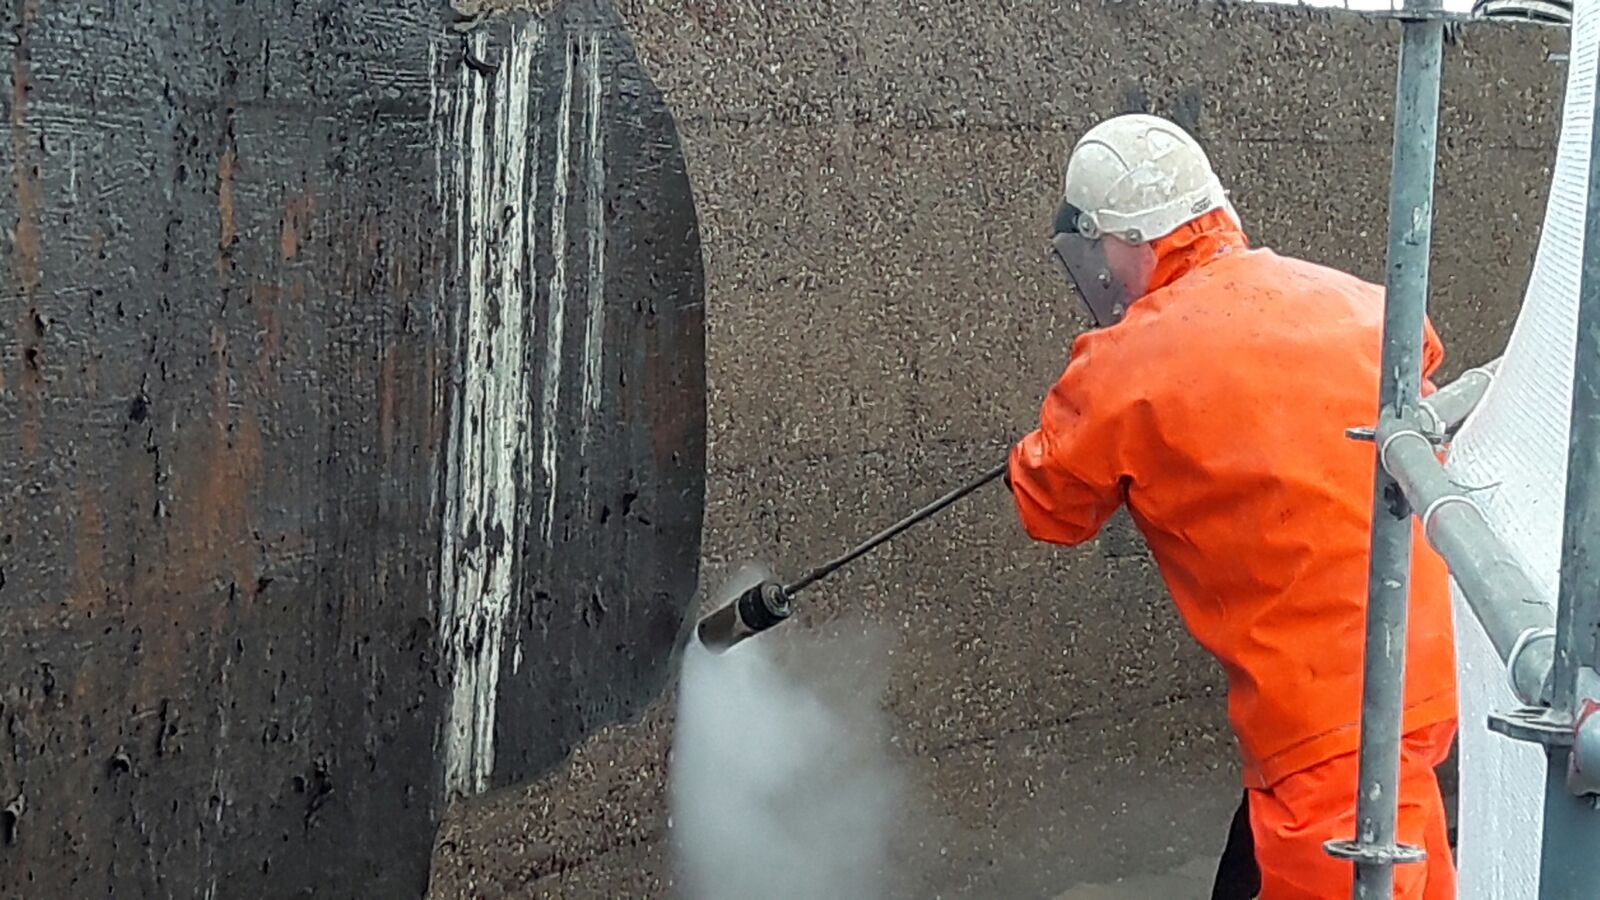 Sabre Jetting using surface preparation services for coatings removal